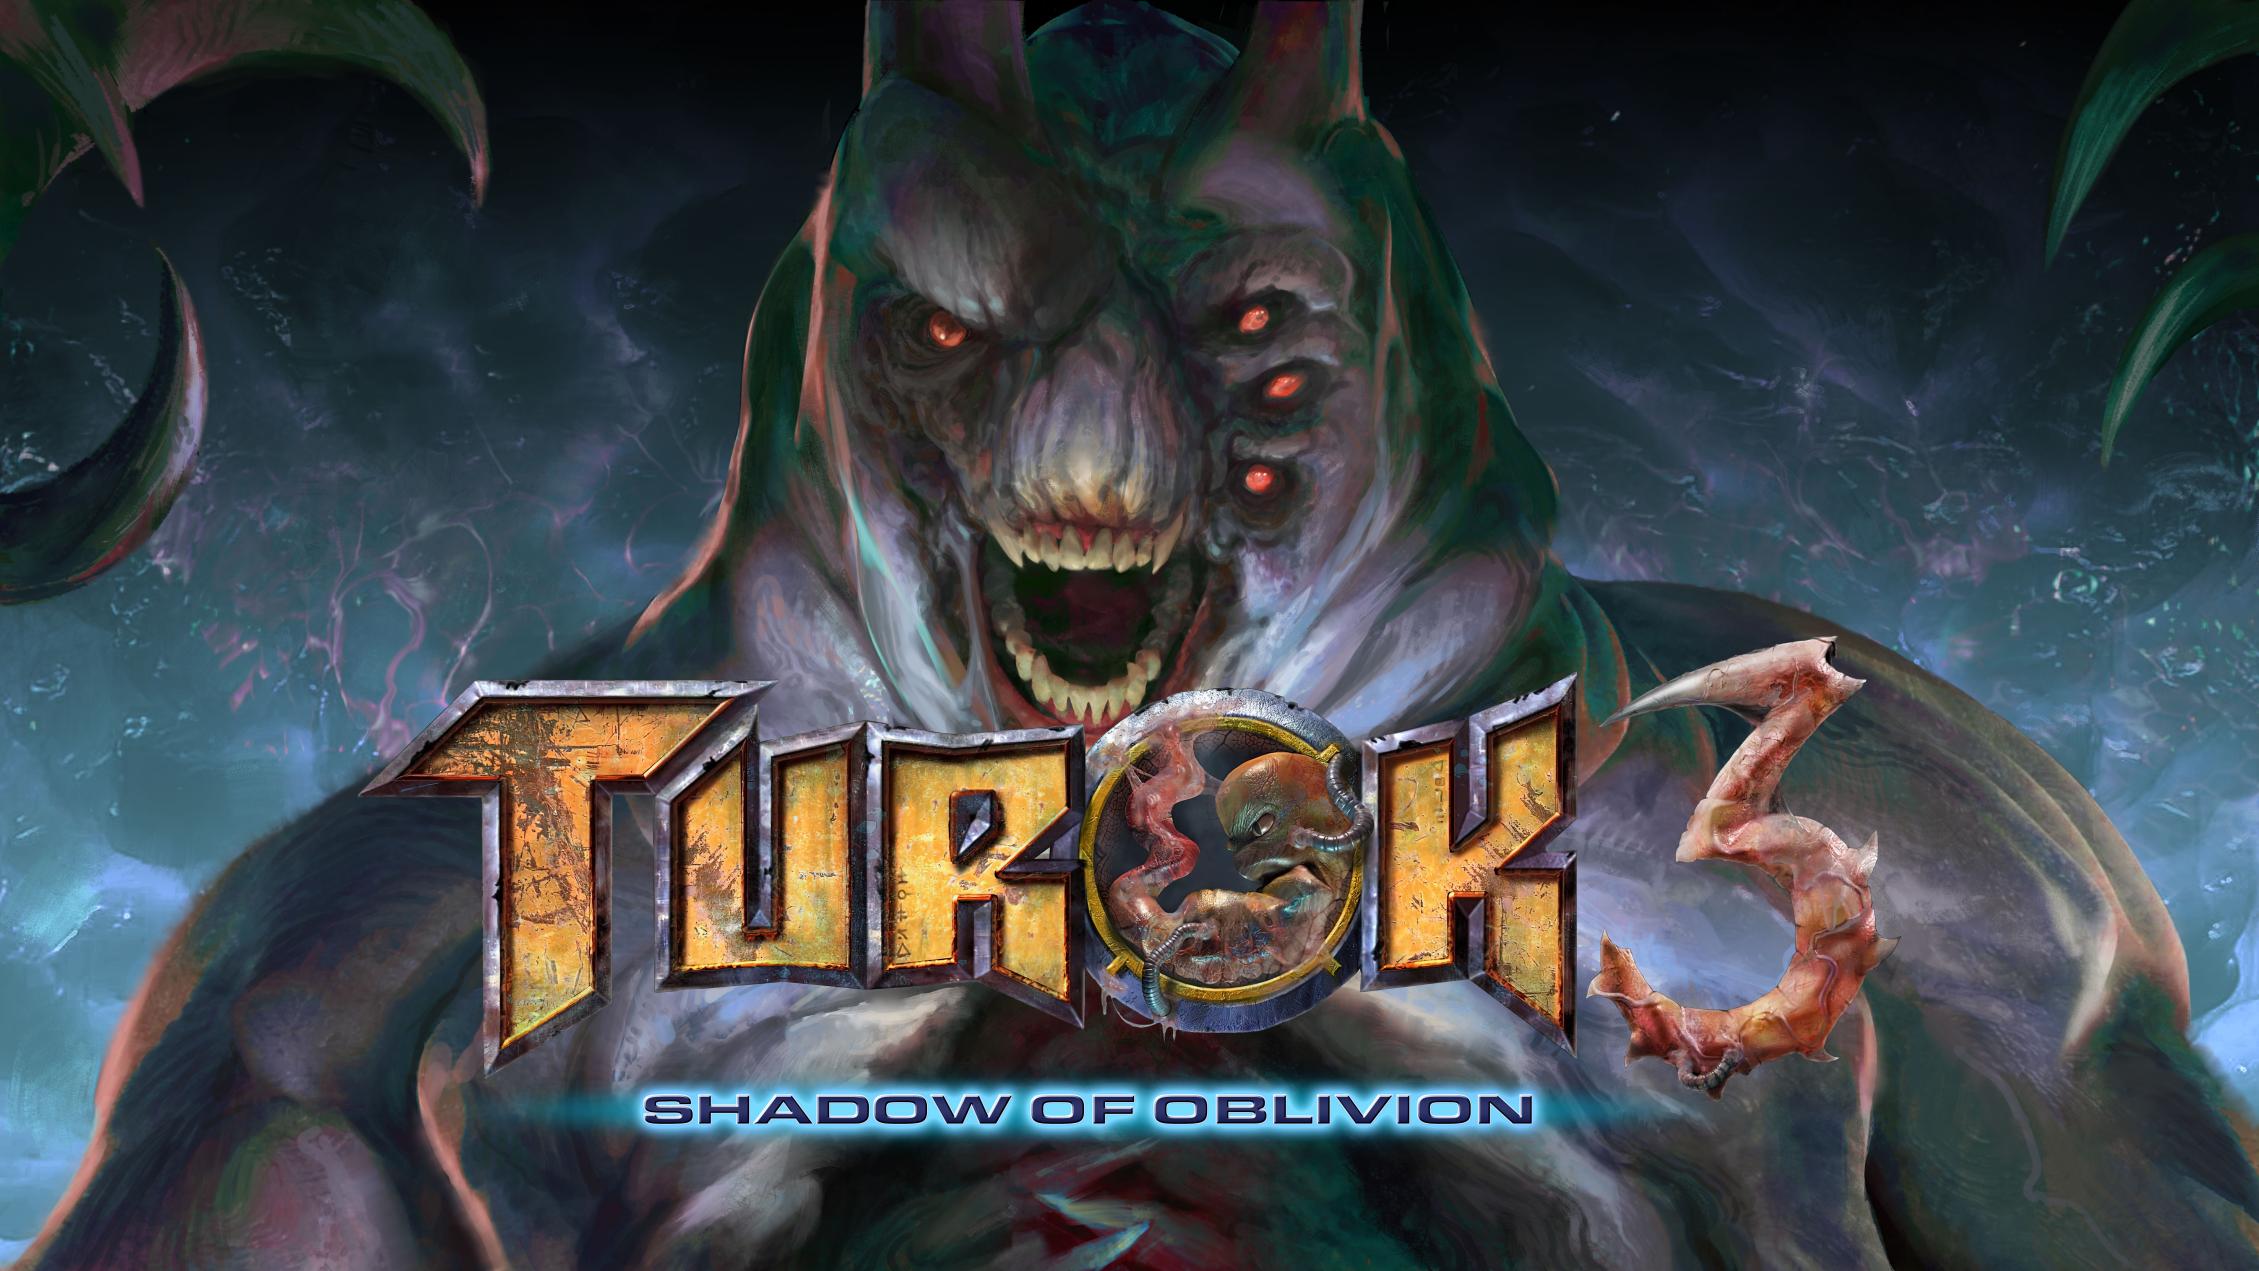 Turok 3: Shadow of Oblivion coming to PS5, Xbox Series, PS4, Xbox One, Switch, and PC on November 14